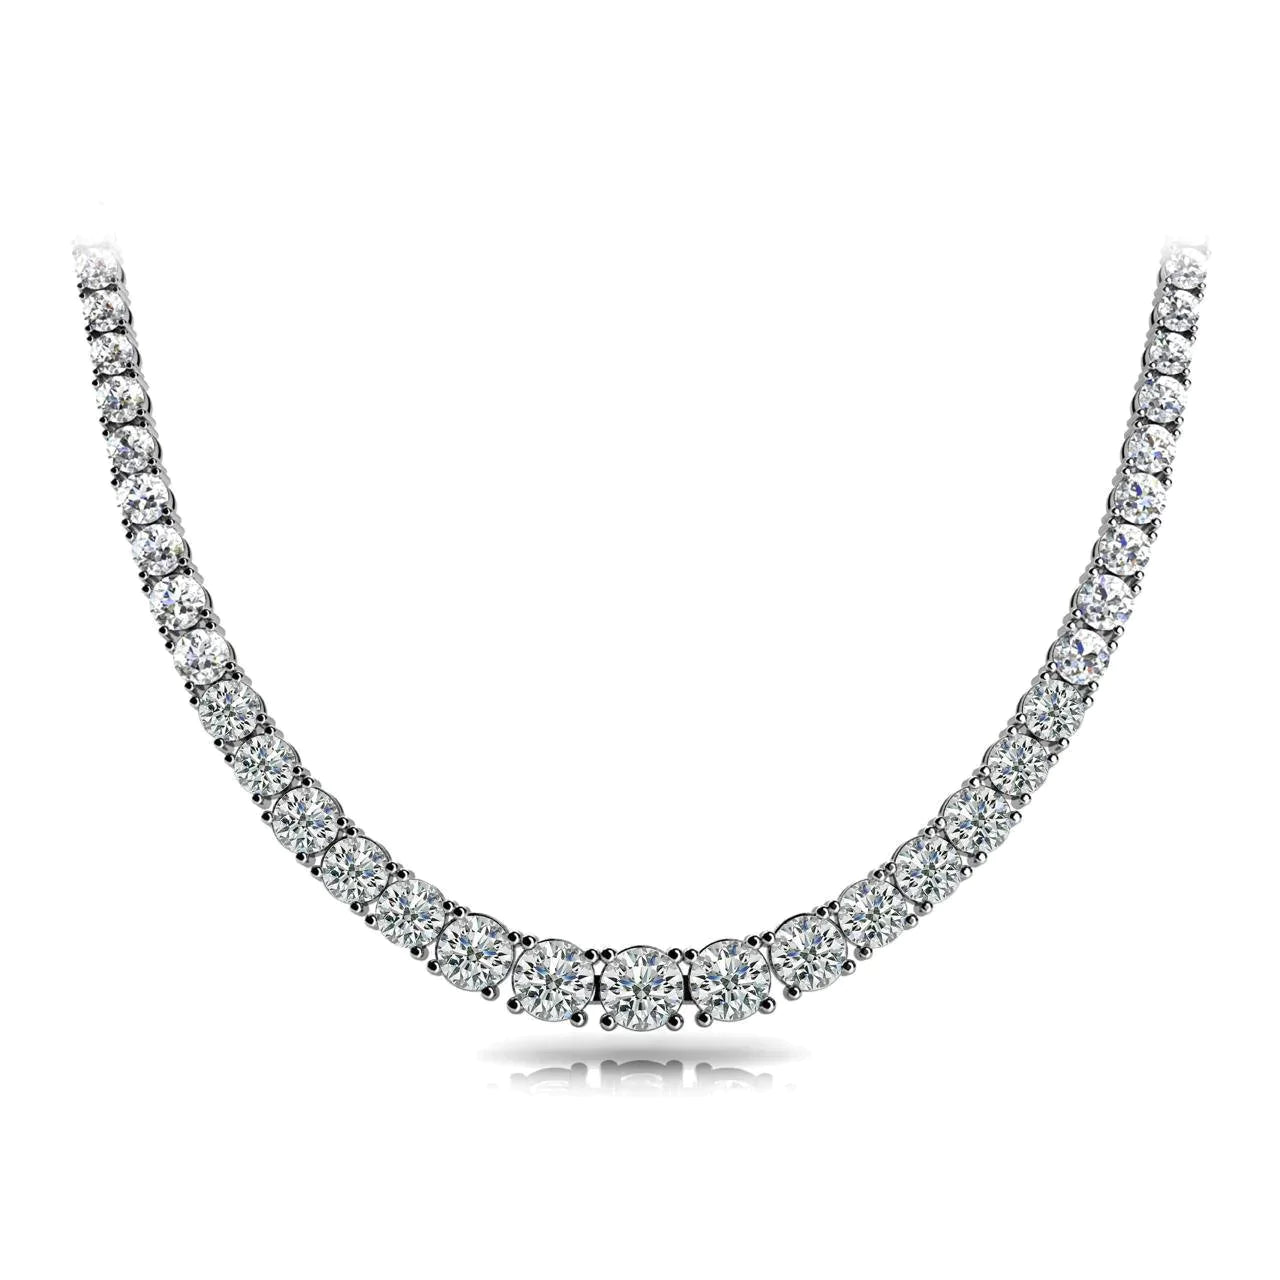 Real Diamond Necklace 20 Carat For Women